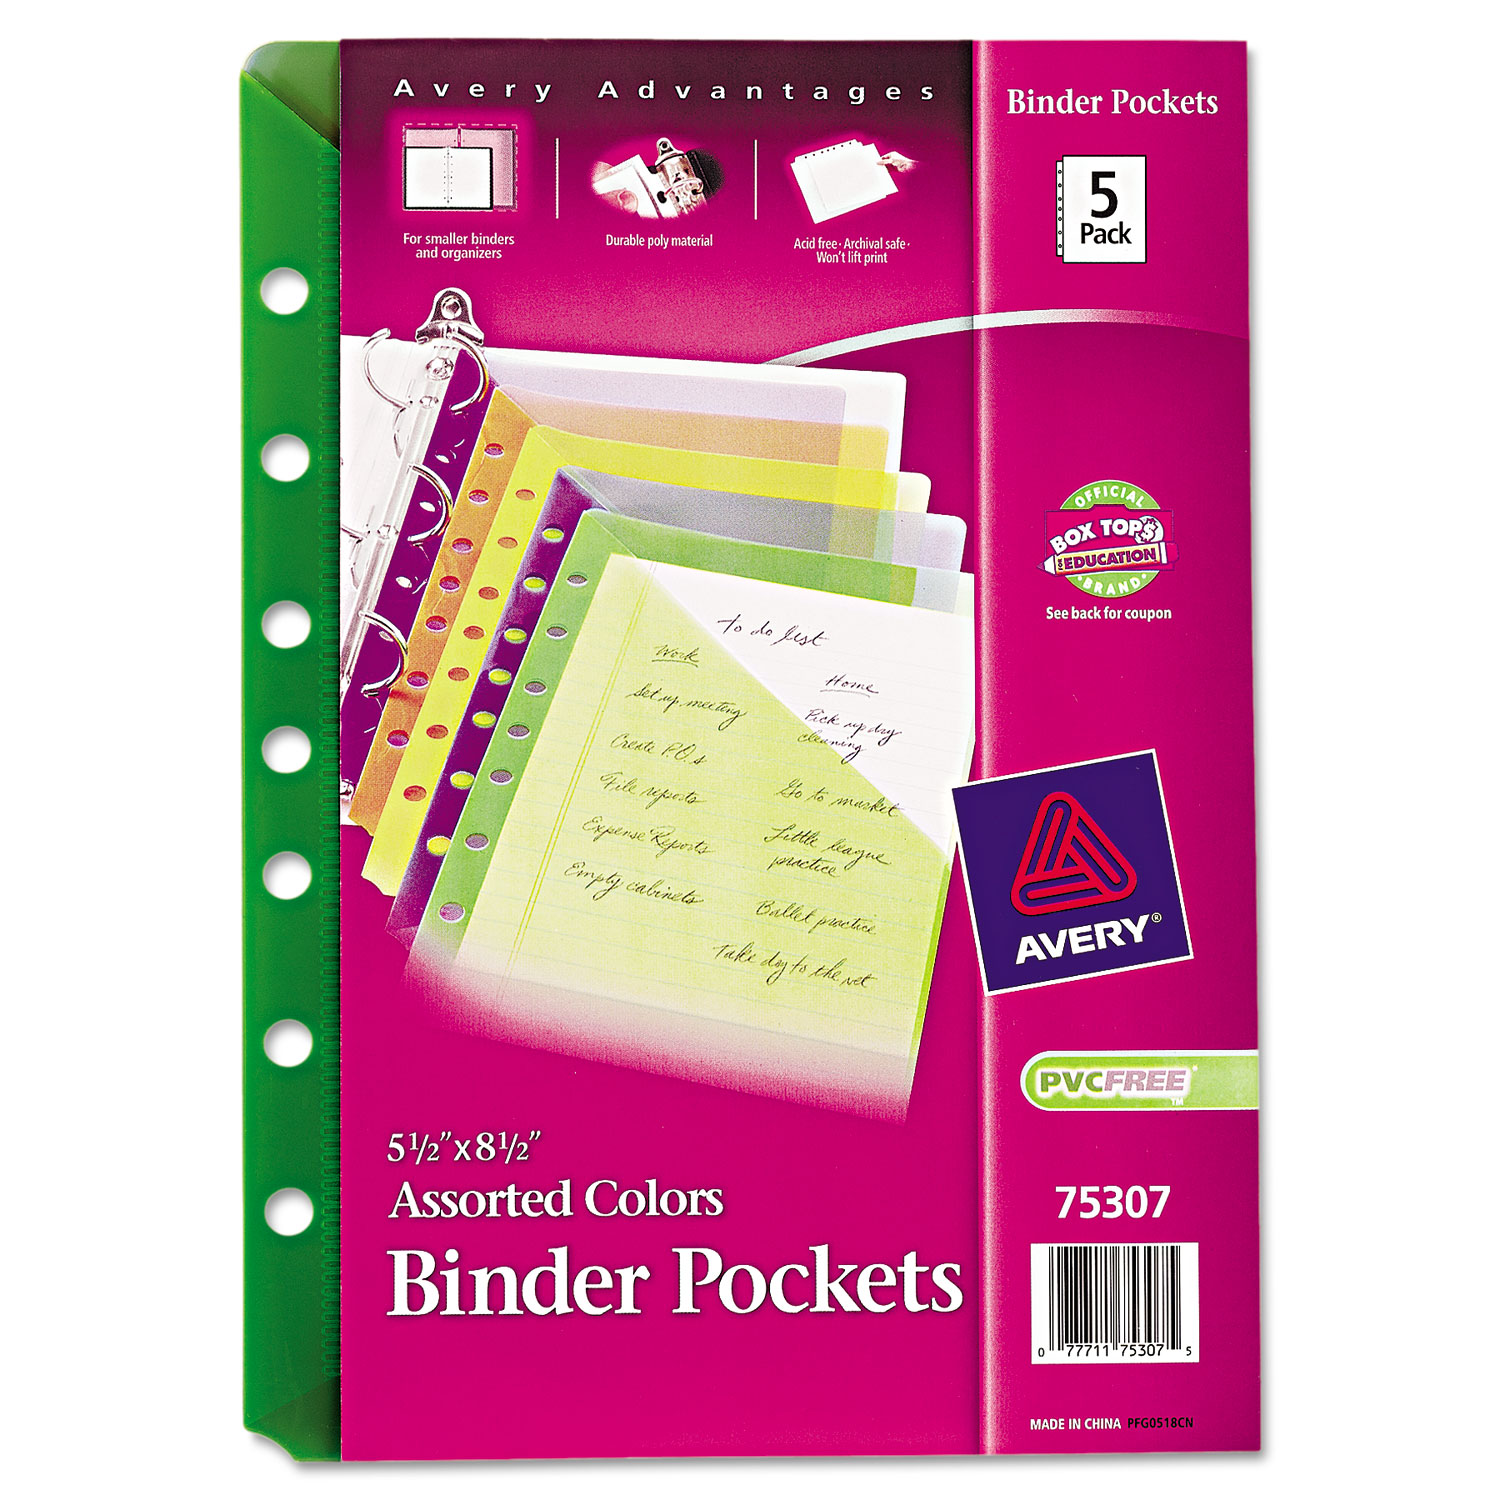  Avery 75307 Small Binder Pockets, Standard, 7-Hole Punched, Assorted, 5 1/2 x 9 1/4, 5/Pack (AVE75307) 